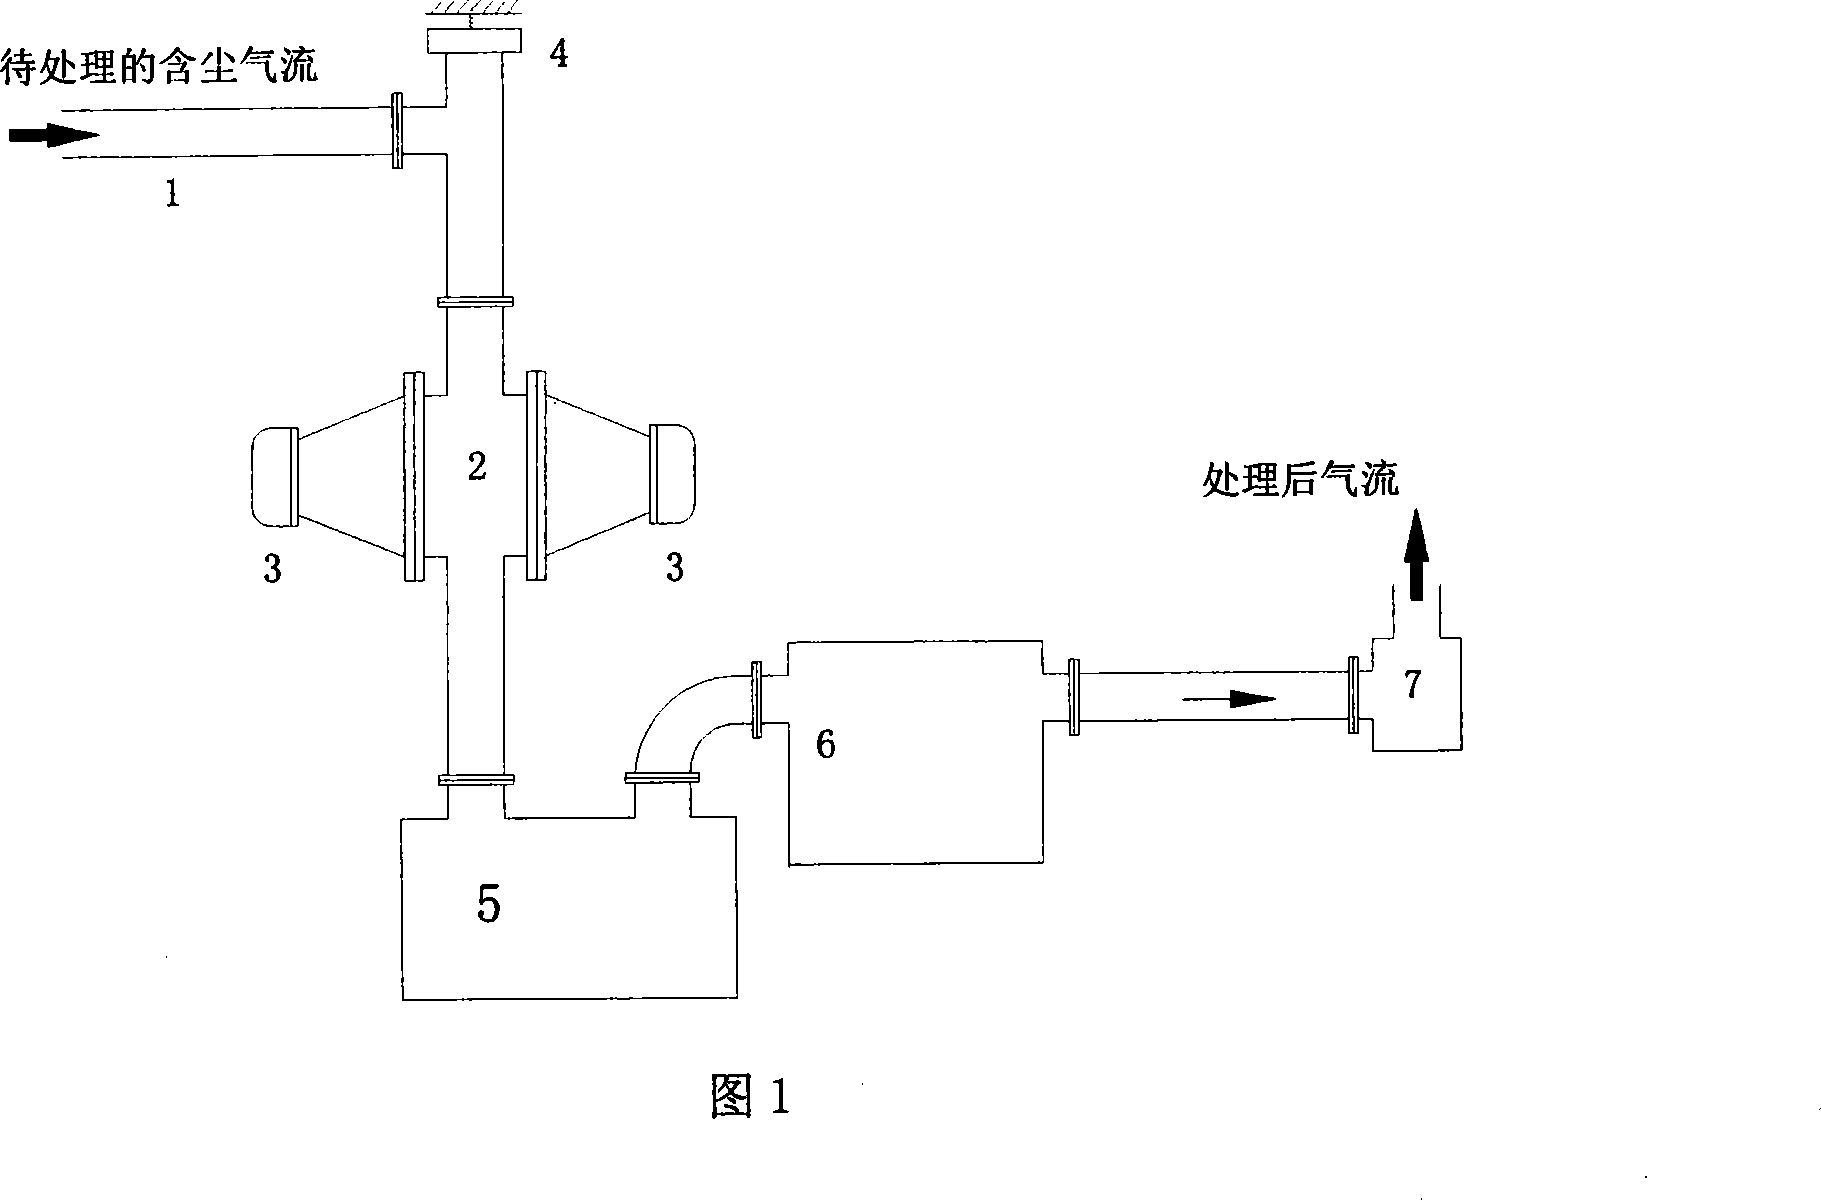 Apparatus and method for removing grains with combined action of sound wave and additional seed grain